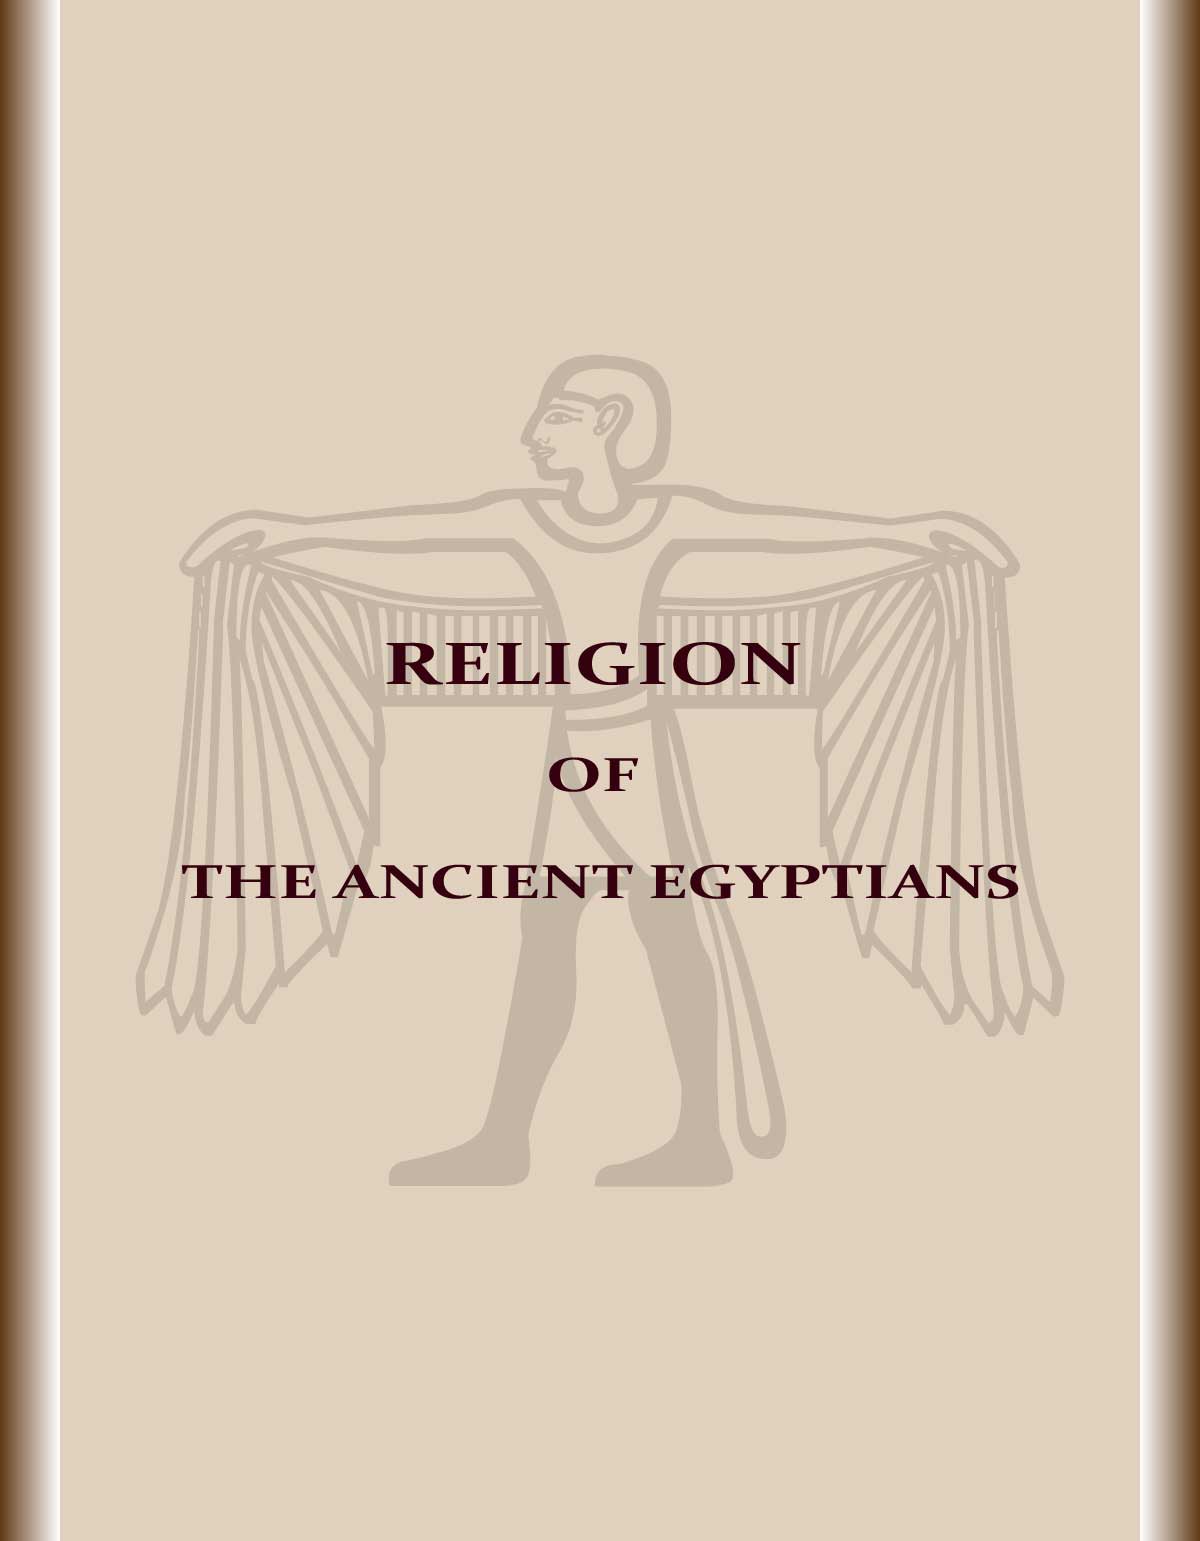 Religion-of-the-ancient-Egyptians-book-cover